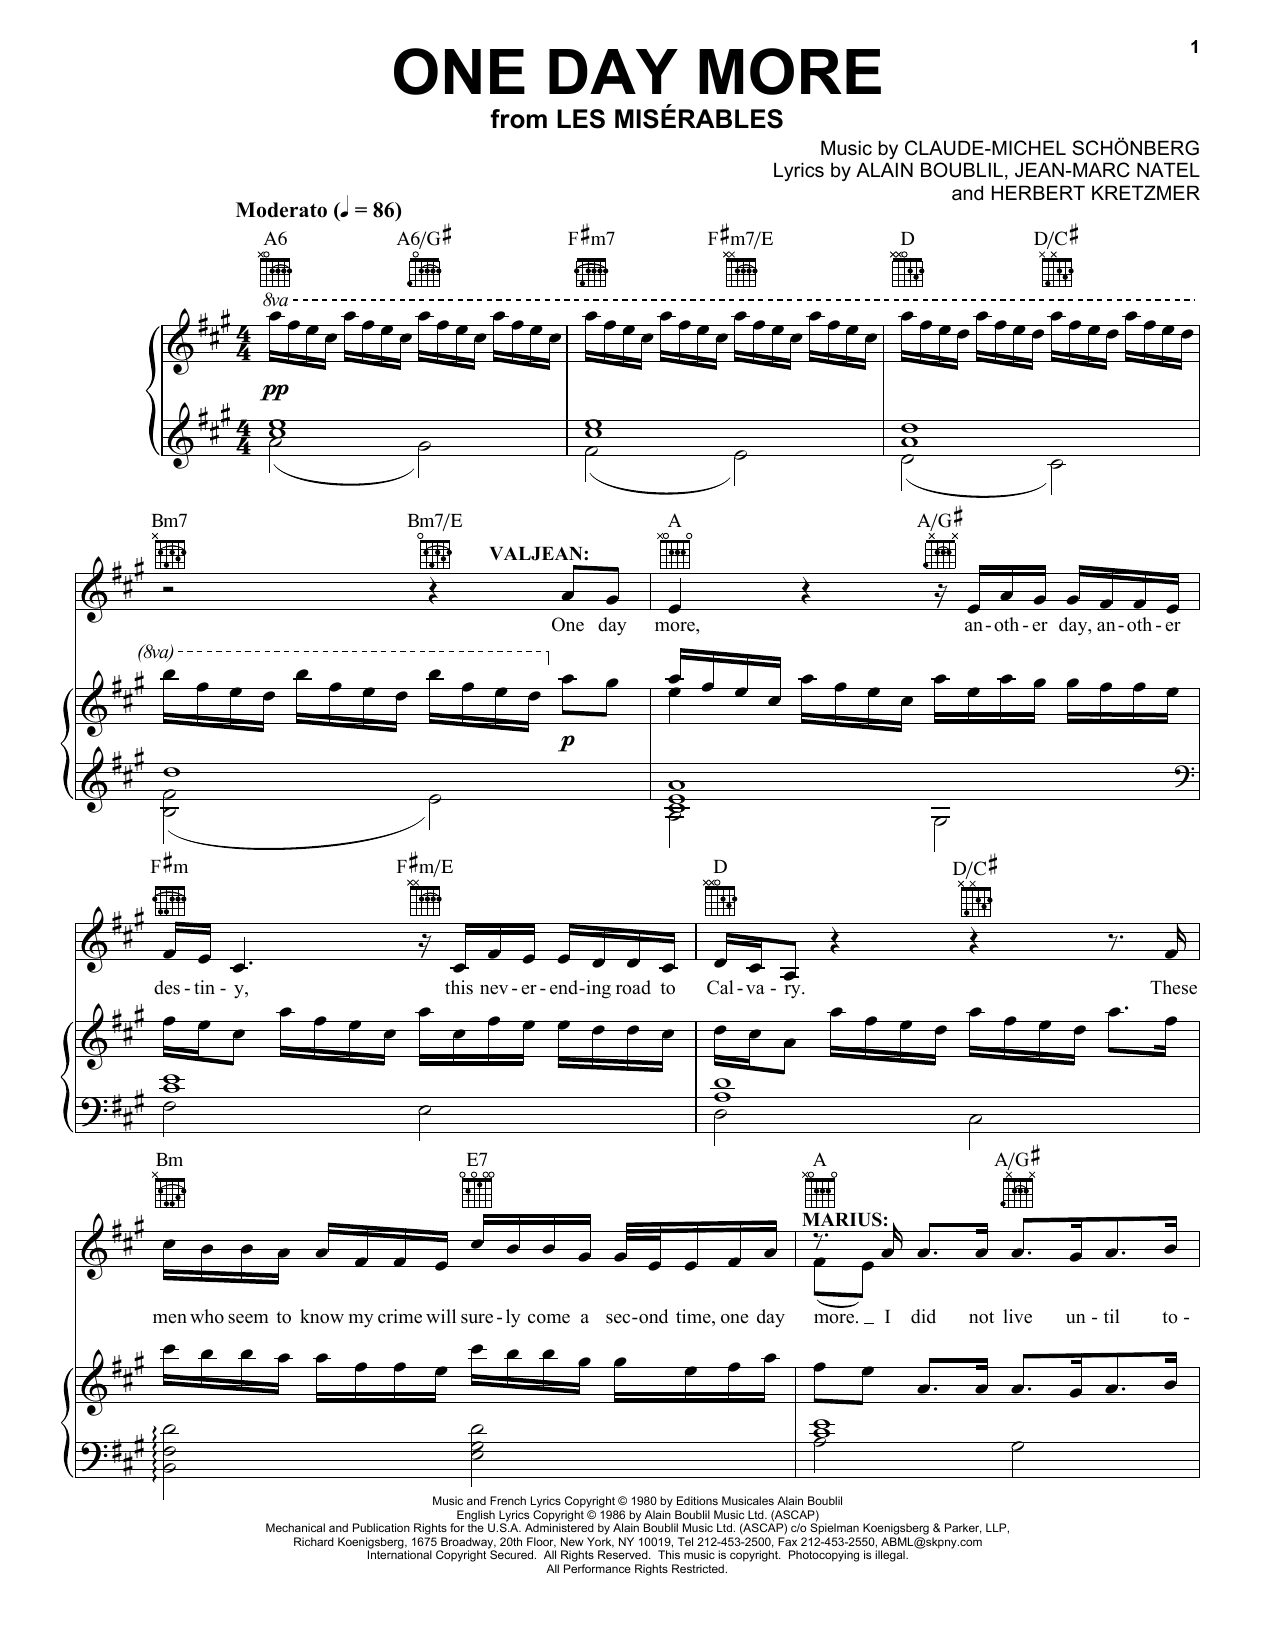 Alain Boublil One Day More (from Les Miserables) sheet music notes and chords. Download Printable PDF.